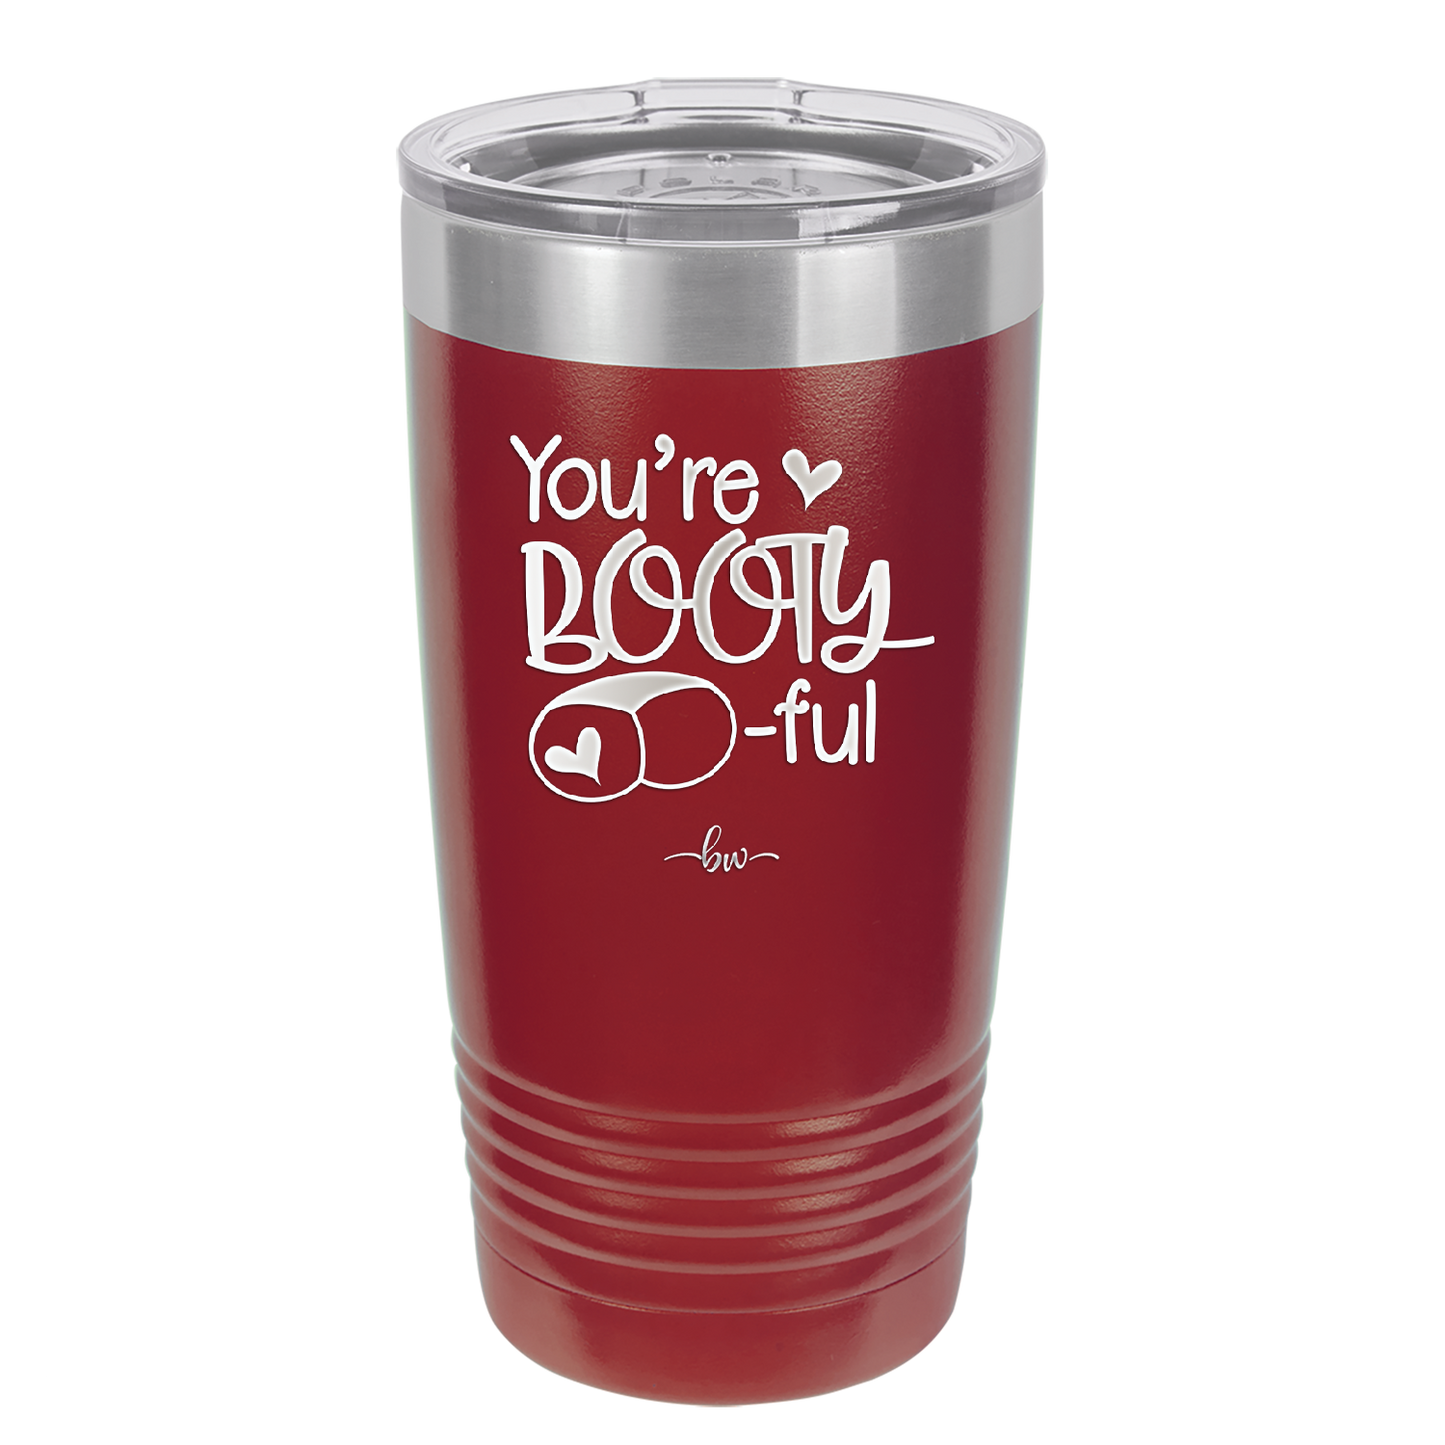 You're Booty ful - Laser Engraved Stainless Steel Drinkware - 1711 -